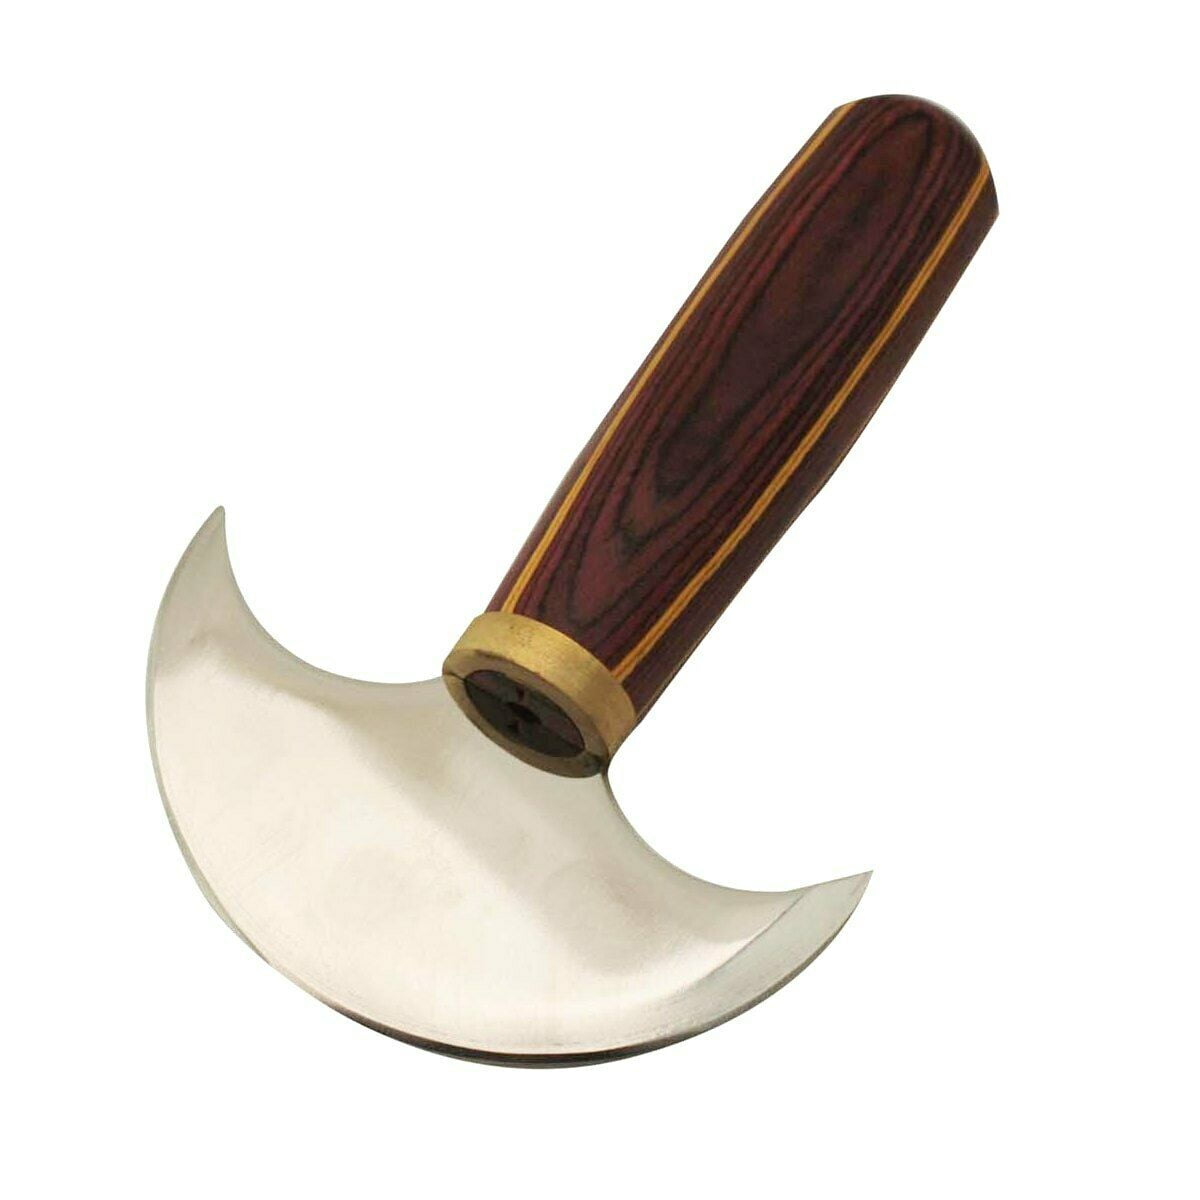 Round Leather Cutter Tool-round Hand Puncher Craft Cutter Knife